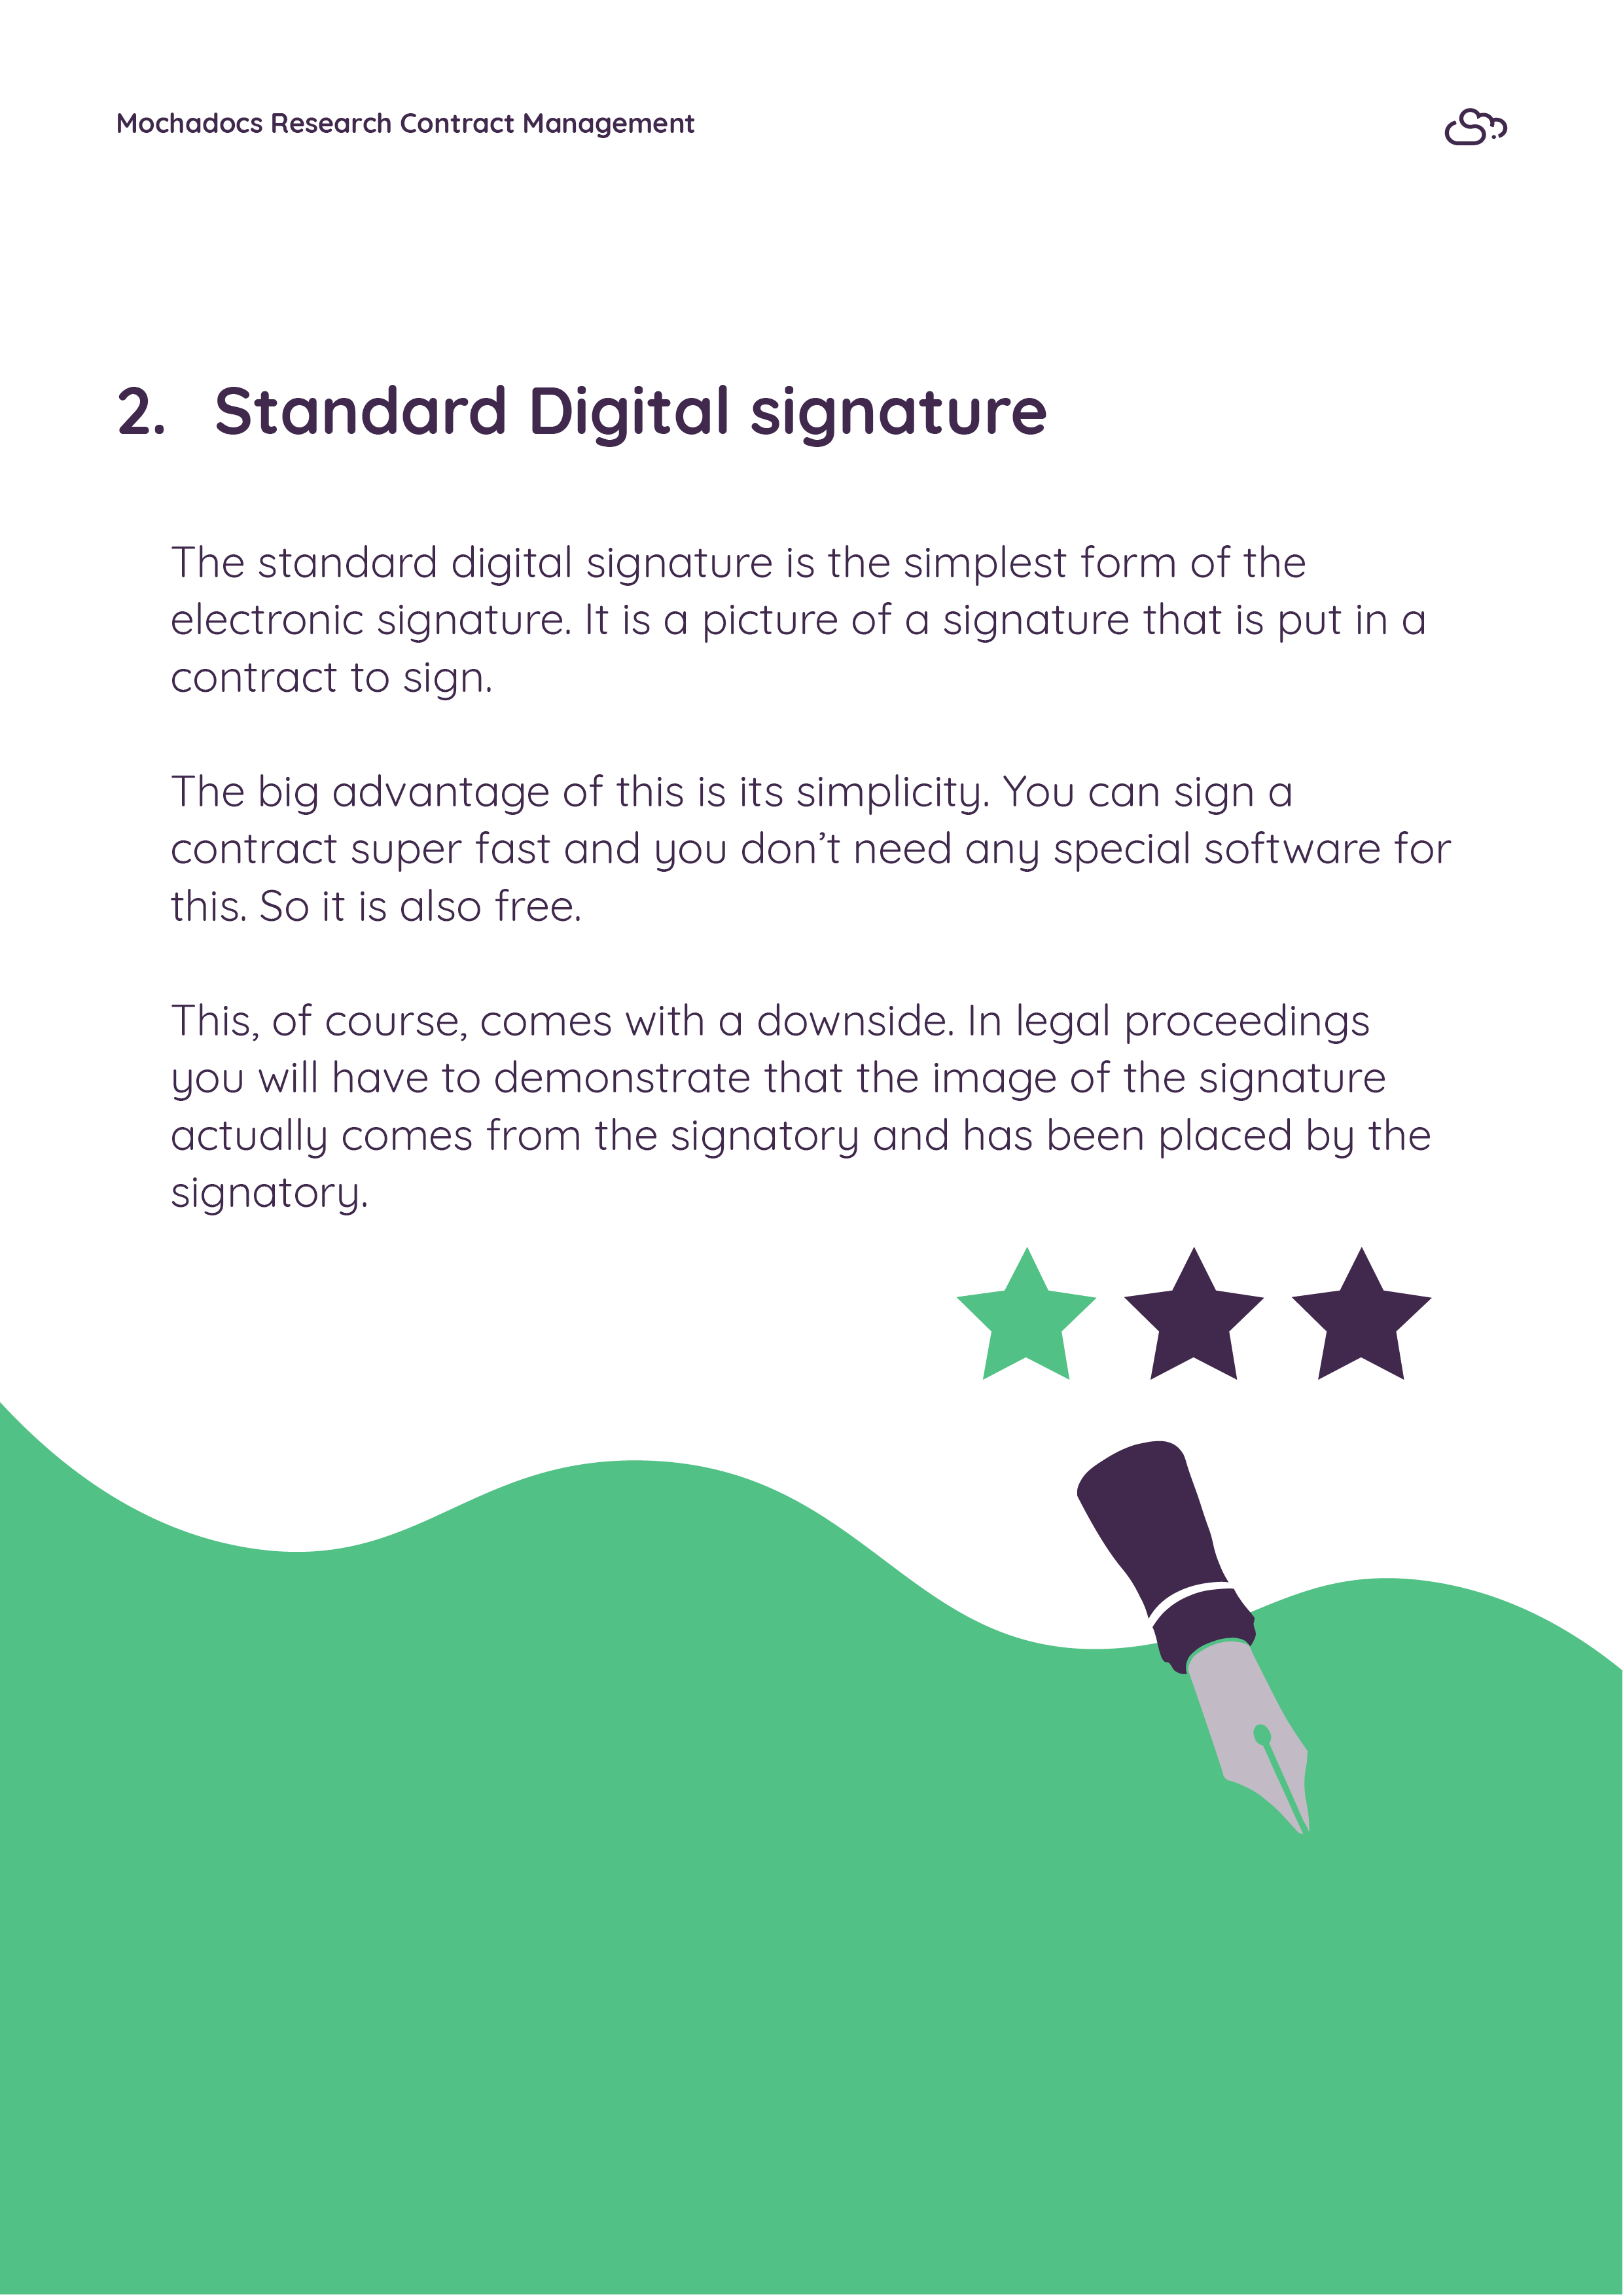 The 3 Types of Digital Signatures8